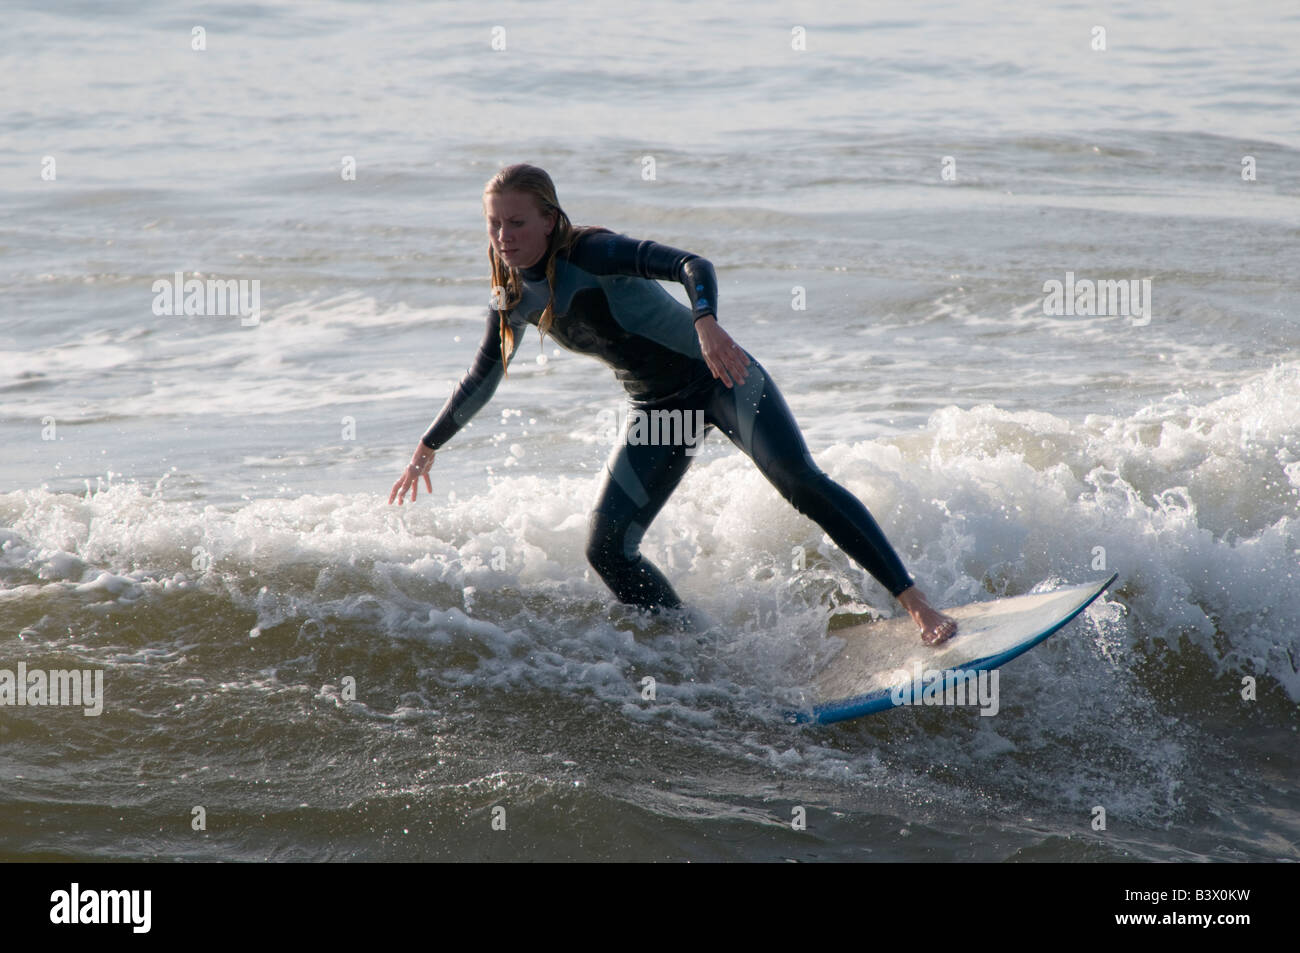 Young blonde teenage girl wearing wetsuit on surfboard surfing on the waves off Aberystwyth Wales UK, summer afternoon Stock Photo